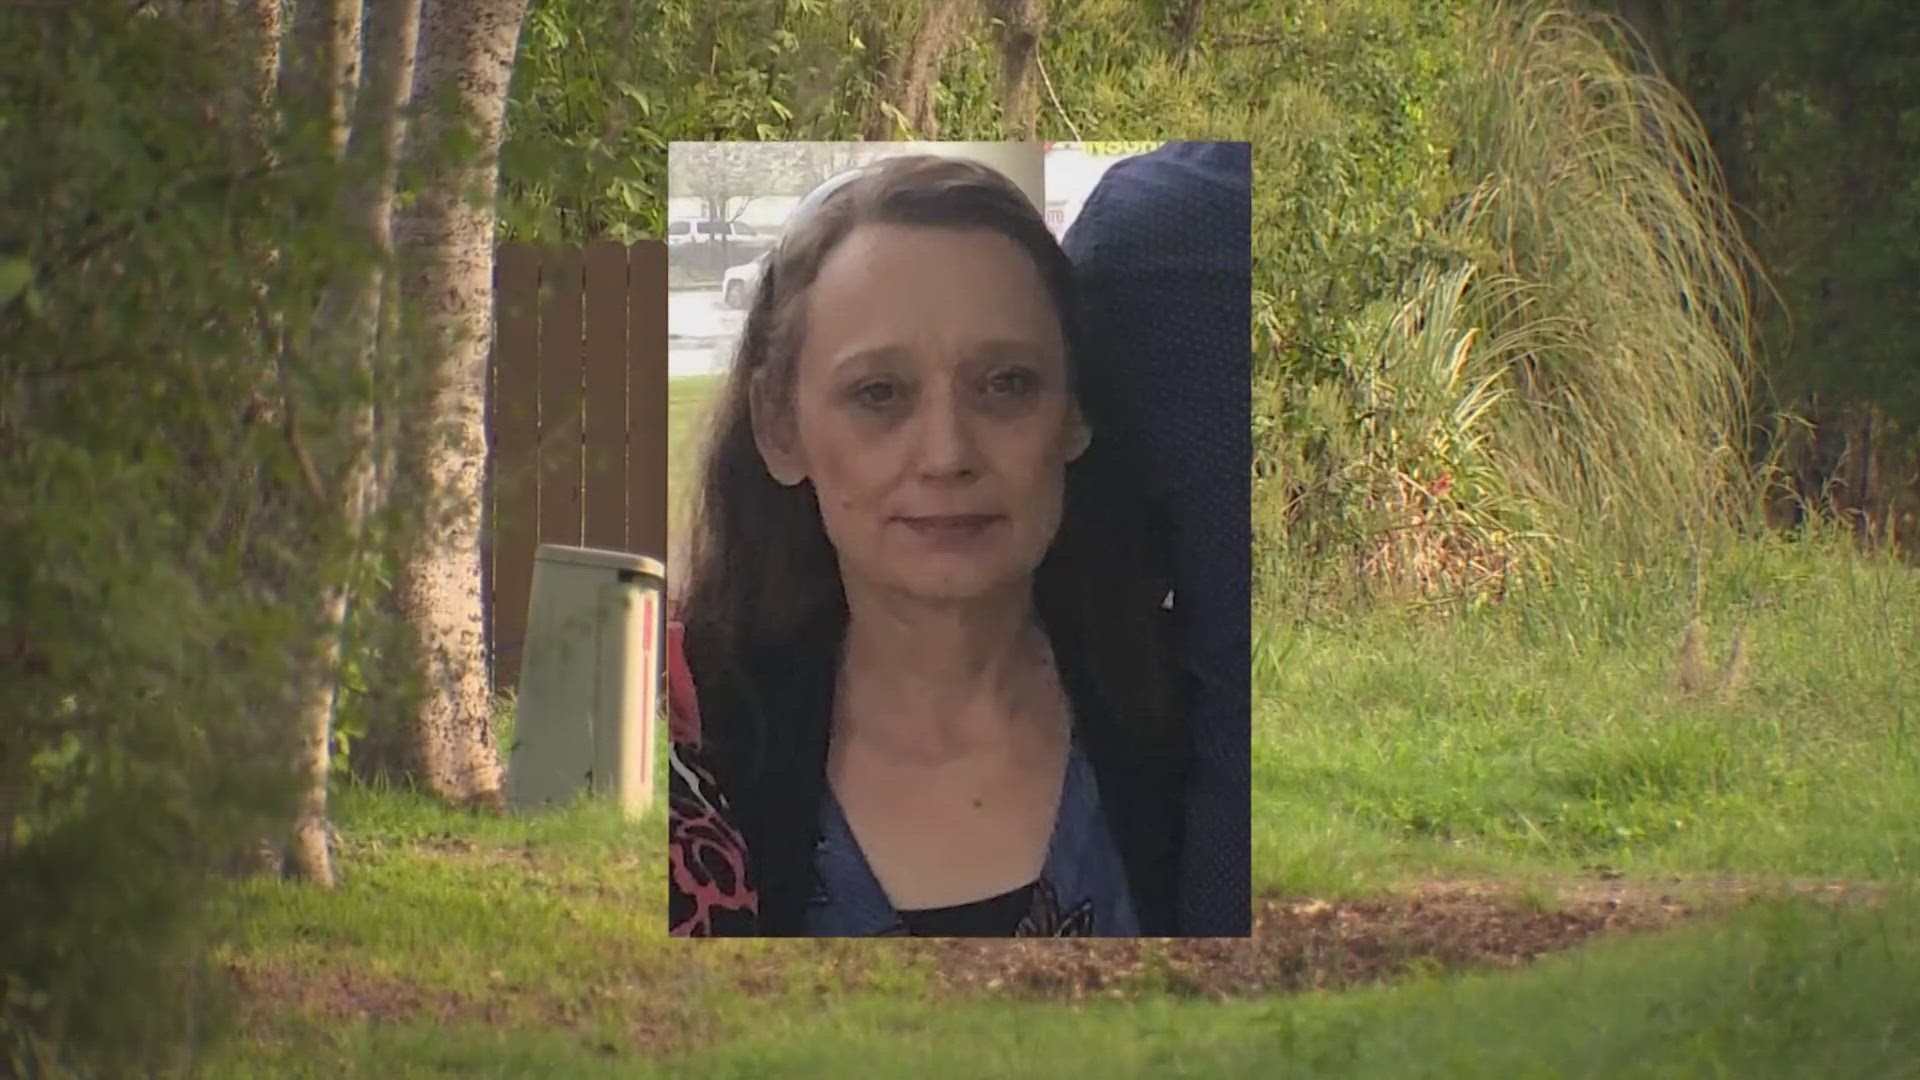 Behind Sheryl Ann Siddall’s home, investigators said they found evidence that something was dragged into Horseshoe Lake, which borders her backyard.